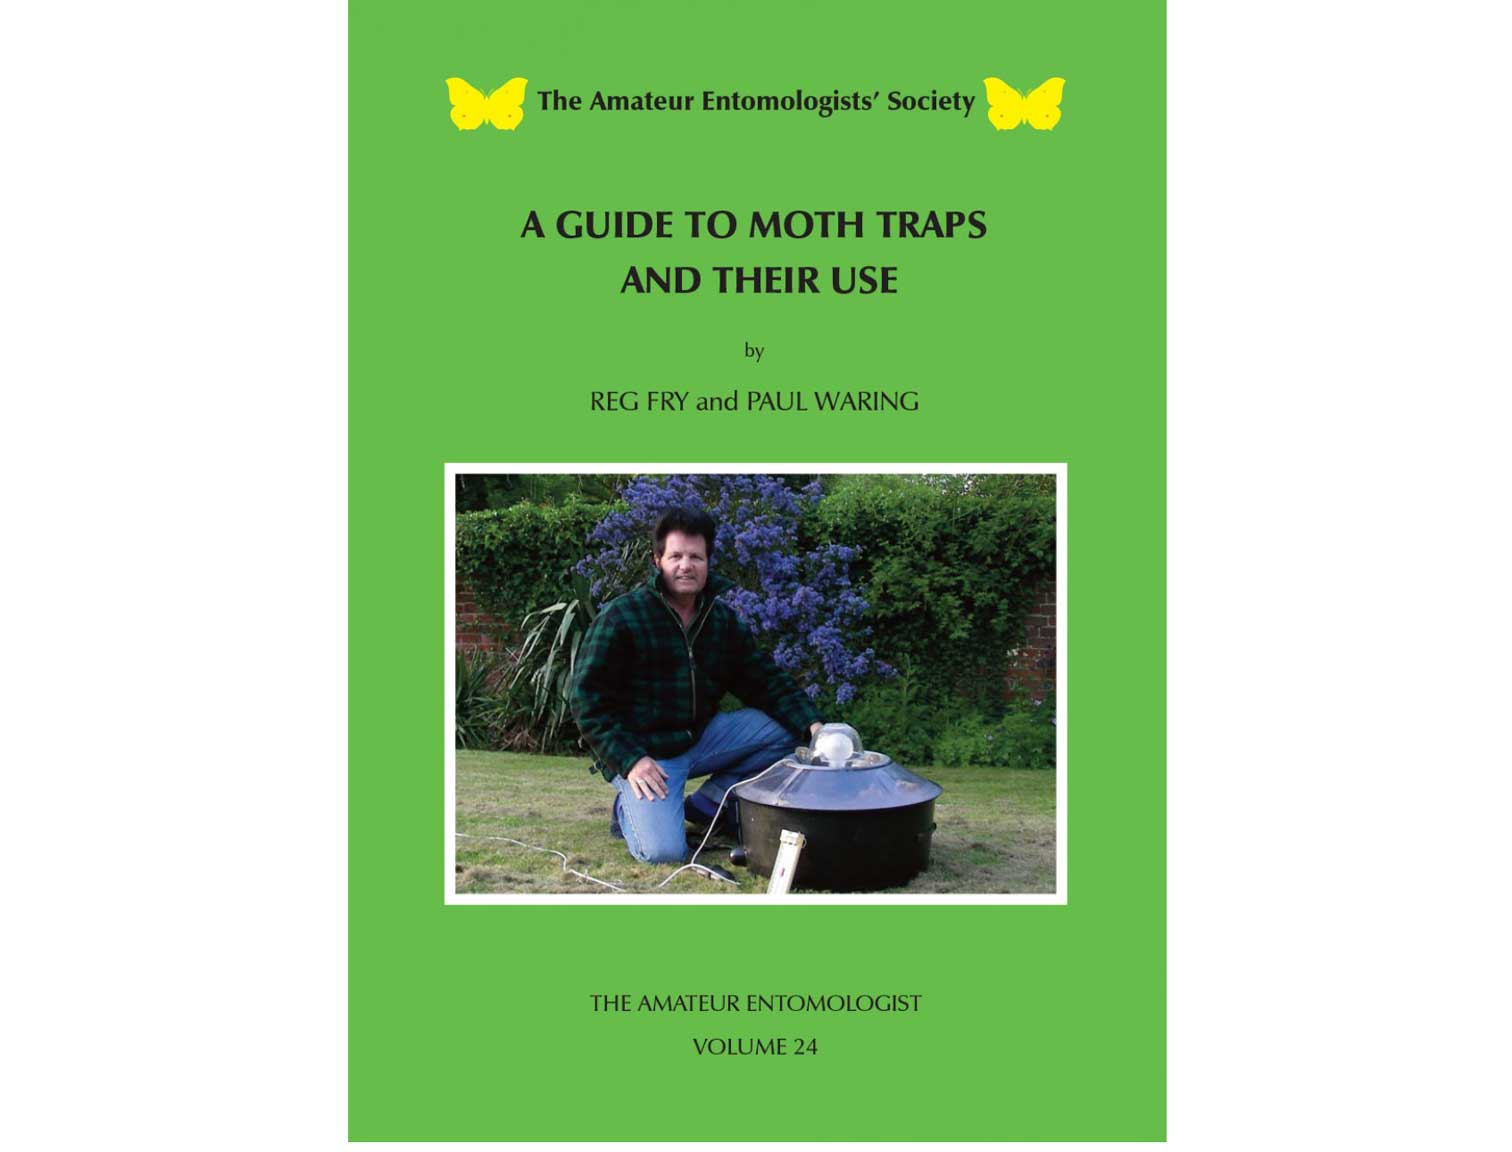 moth-traps-and-their-use2020